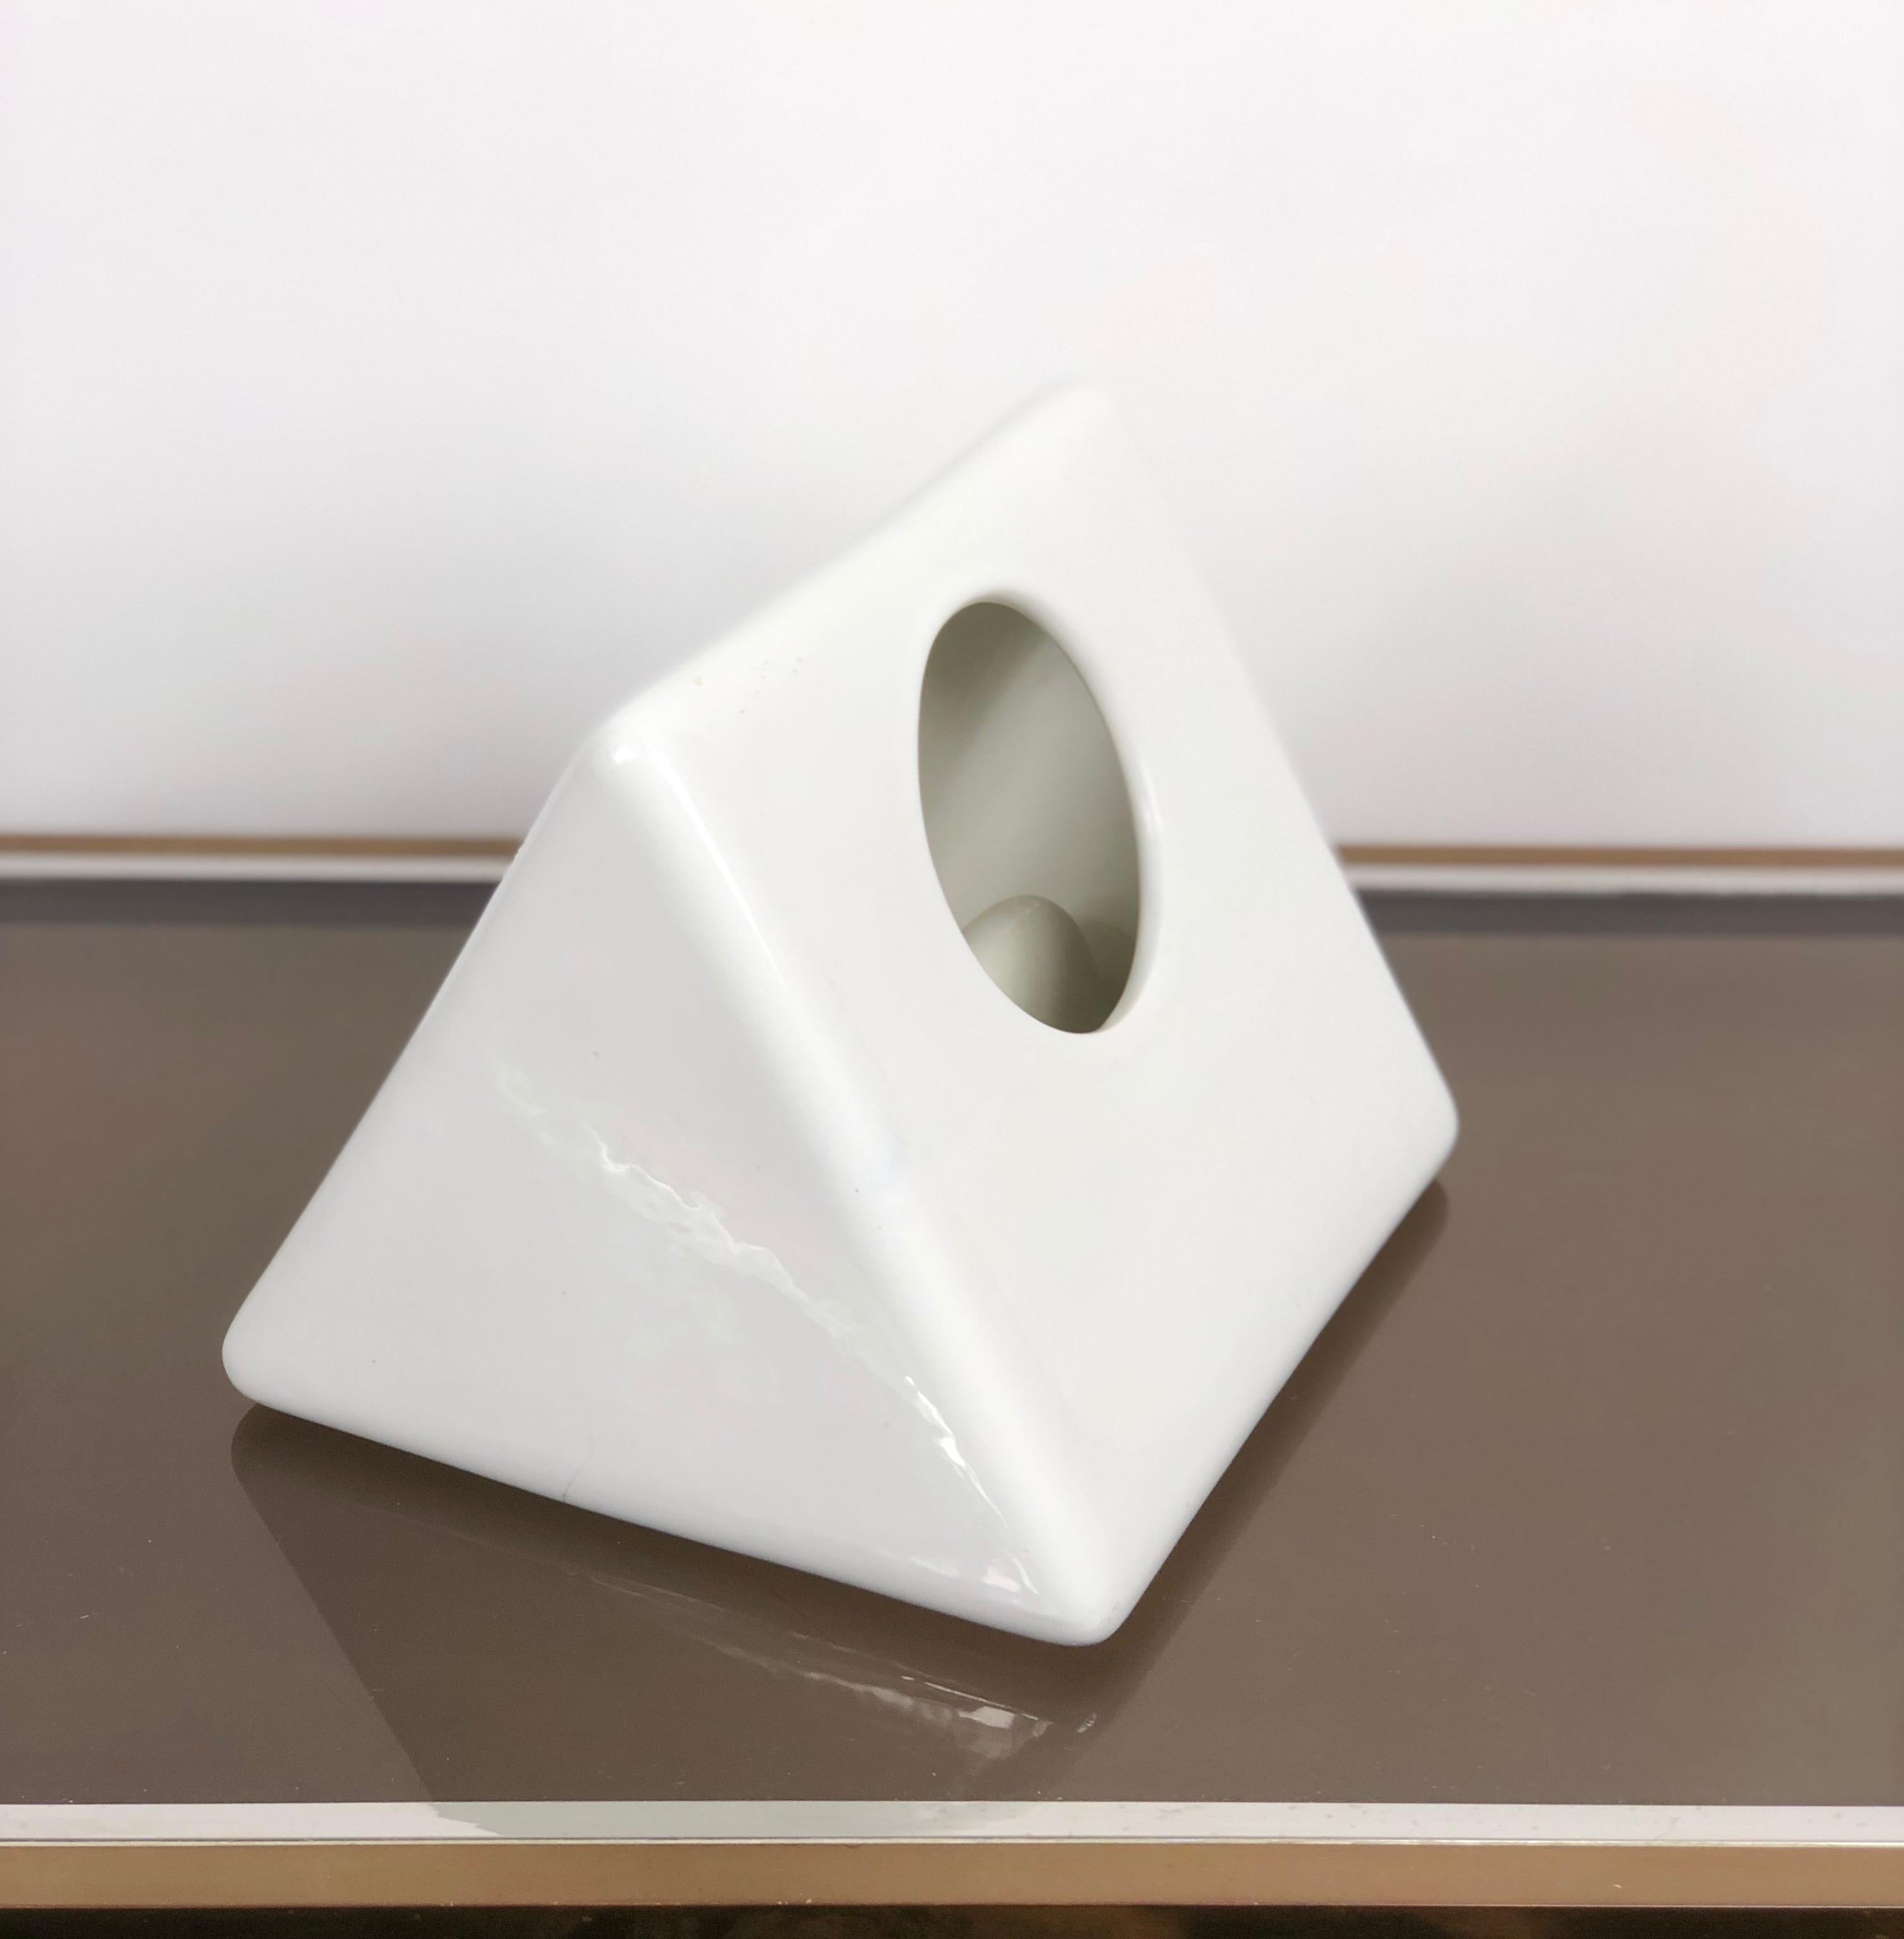 Particular triangular vase made of white ceramics by the Italian designer Gabbianelli during the 1970s. As the photos show, this wonderful item has two little grains on the bottom.